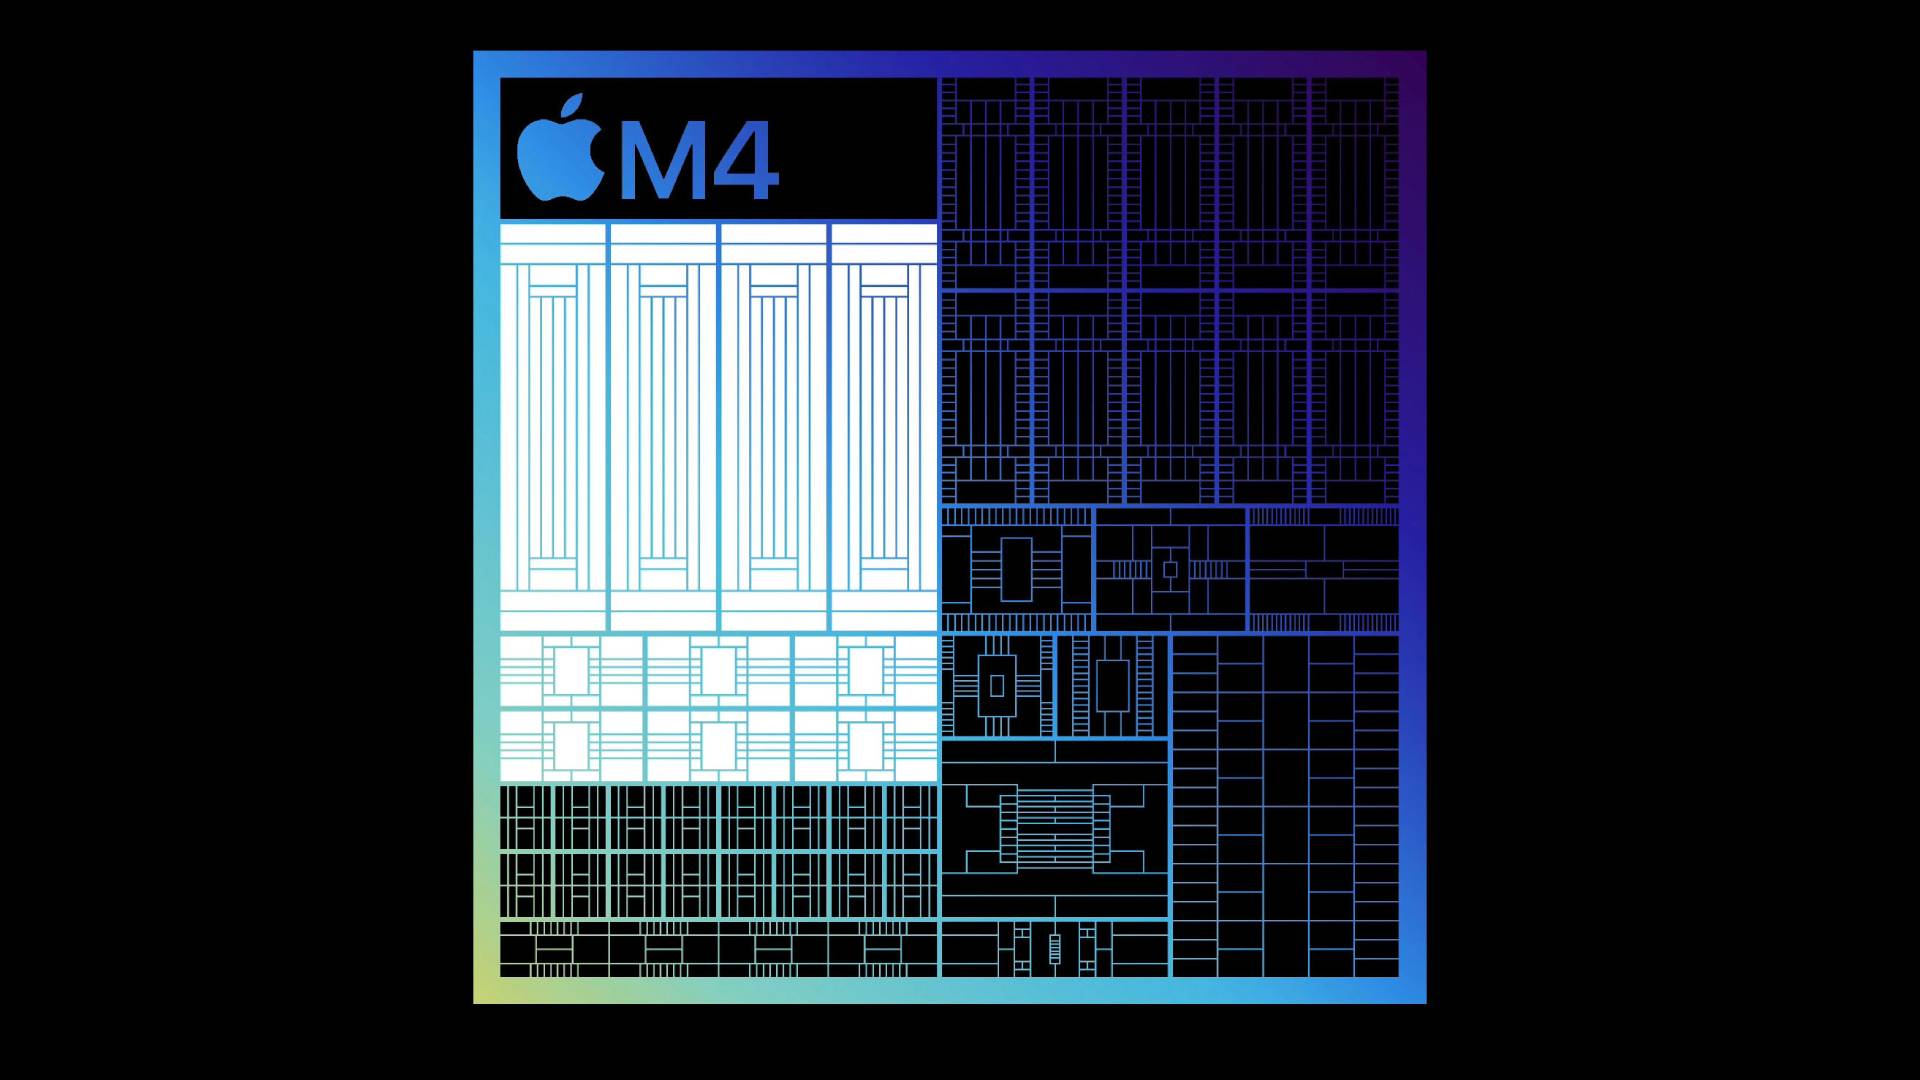 New benchmarks reveal just how powerful the new Apple M4 chip is